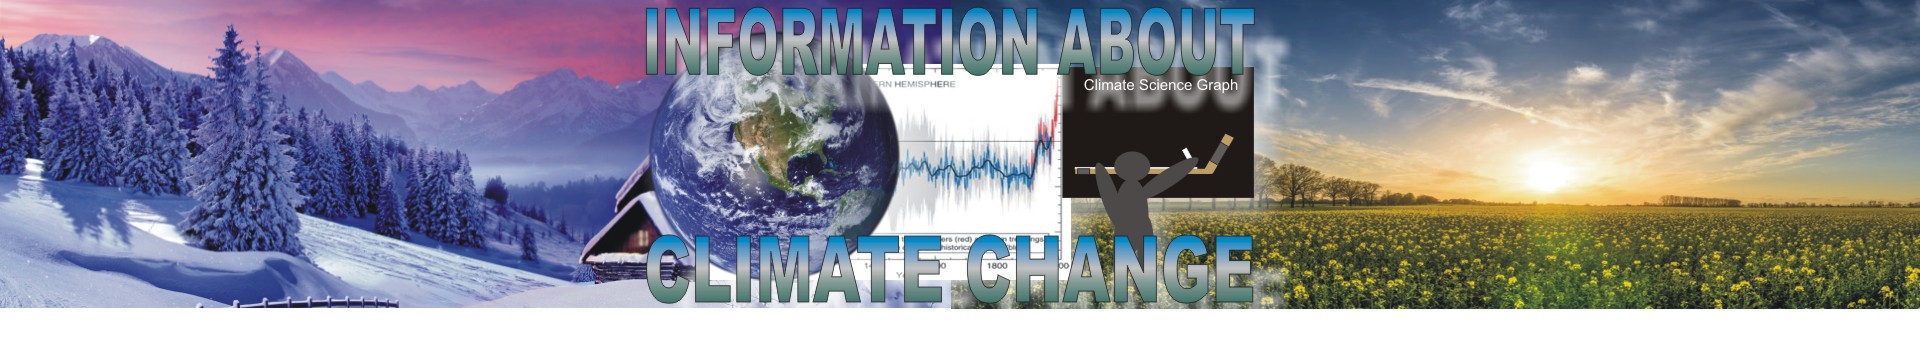 Climate Change Information